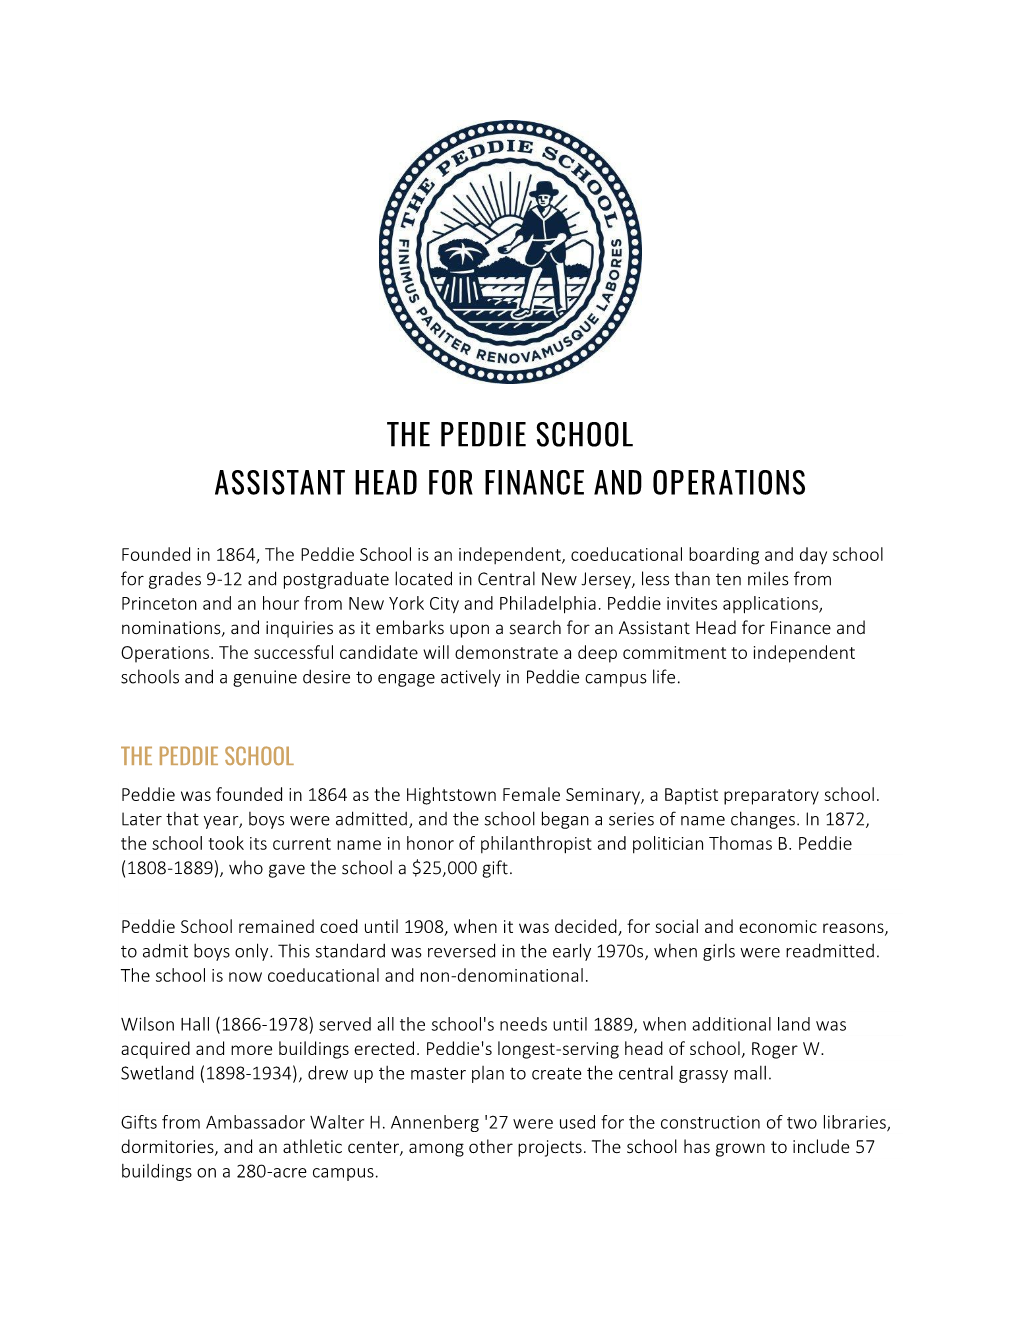 The Peddie School Assistant Head for Finance and Operations